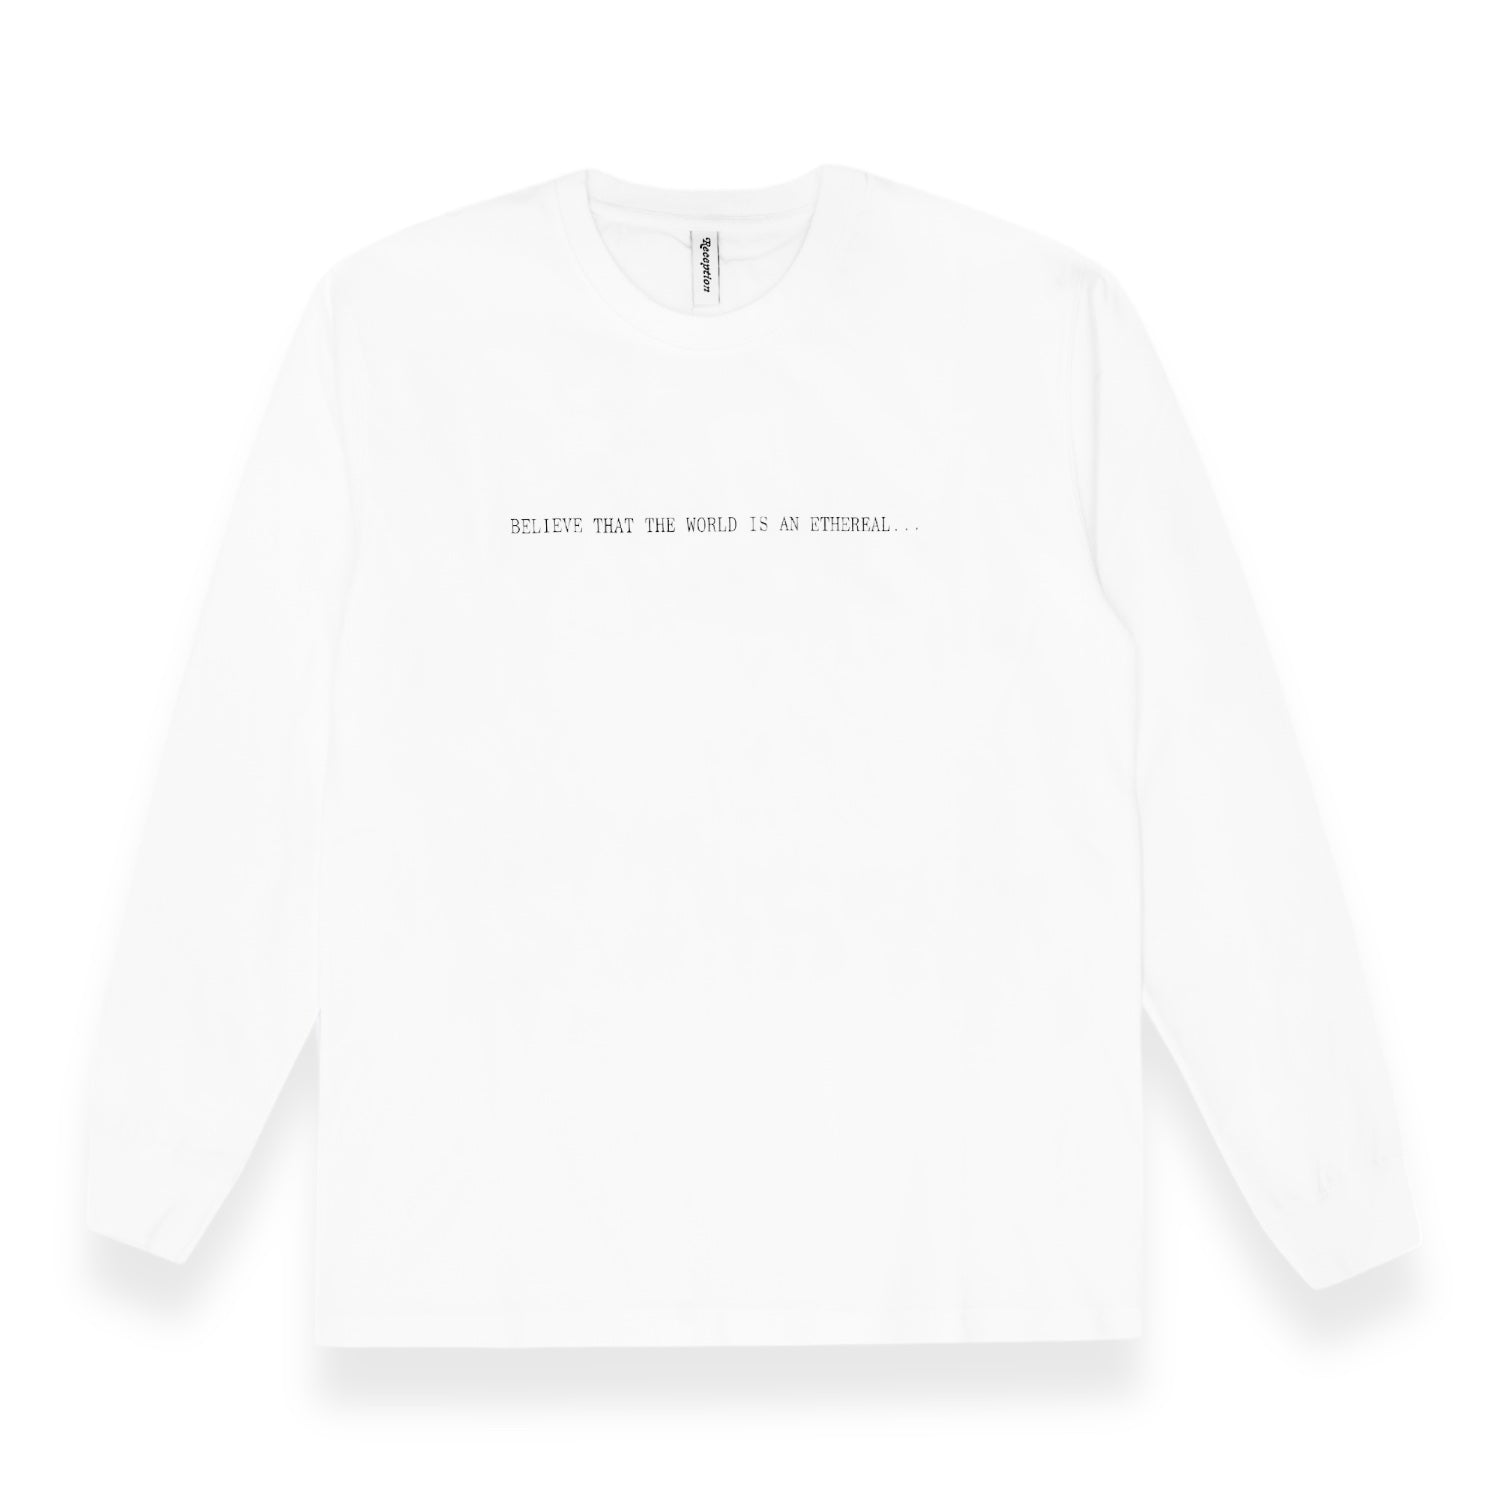 Reception - Ethereal LS Tee (White)